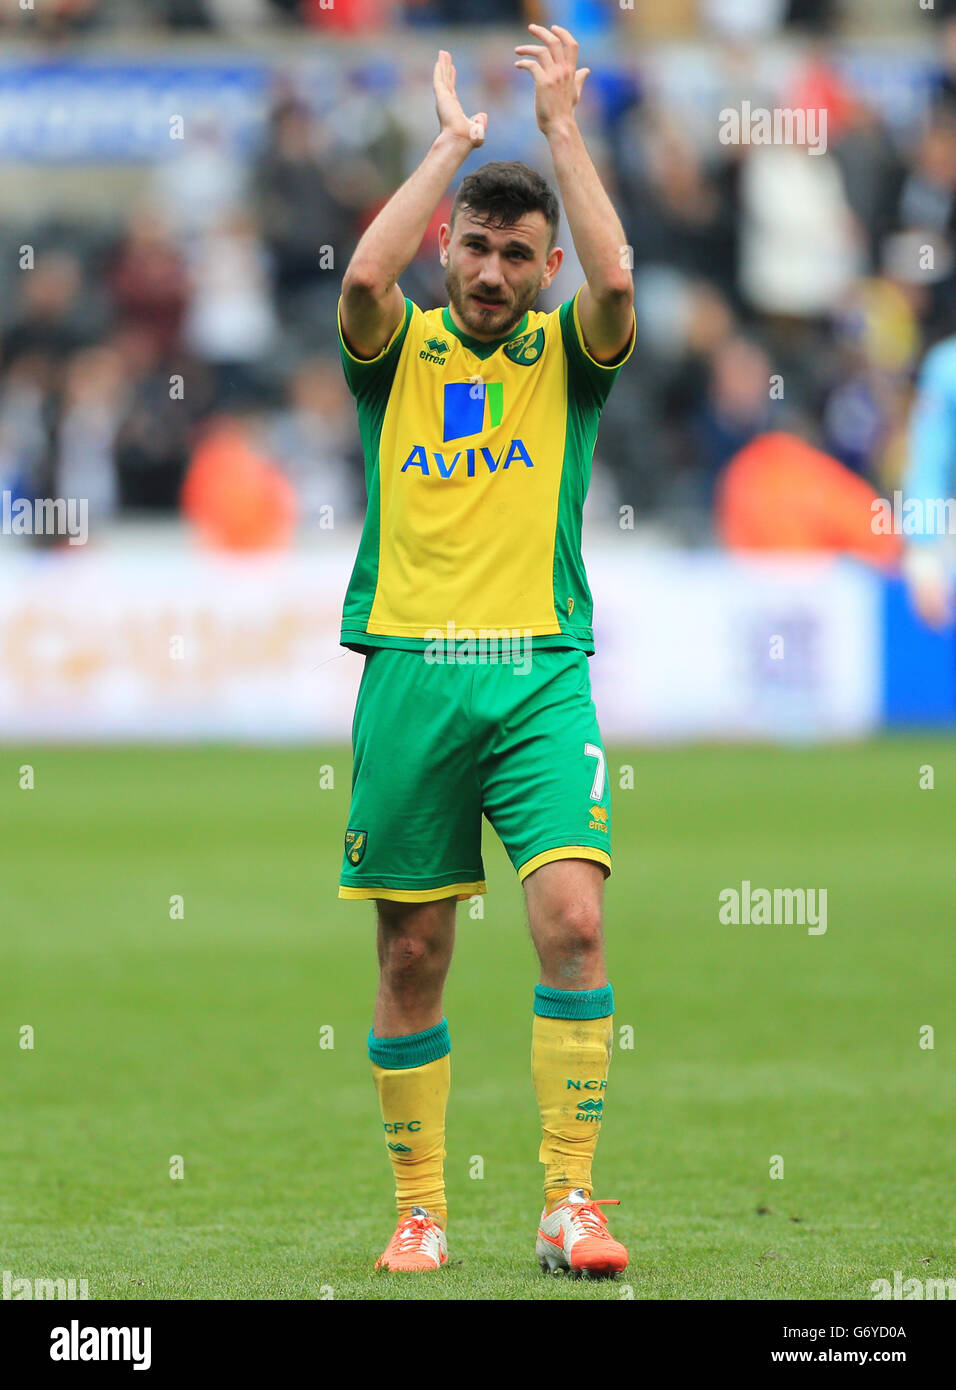 Norwich City's Robert Snodgrass shows his dejection after their defeat during the Barclays Premier League match at the Liberty Stadium, Swansea. PRESS ASSOCIATION Photo. Picture date: Saturday March 29, 2014. See PA Story SOCCER Swansea. Photo credit should read: Nick Potts/PA Wire. Maximum 45 images during a match. No video emulation or promotion as 'live'. No use in games, competitions, merchandise, betting or single club/player services. No use with unofficial audio, video, data, fixtures or club/league logos. Stock Photo